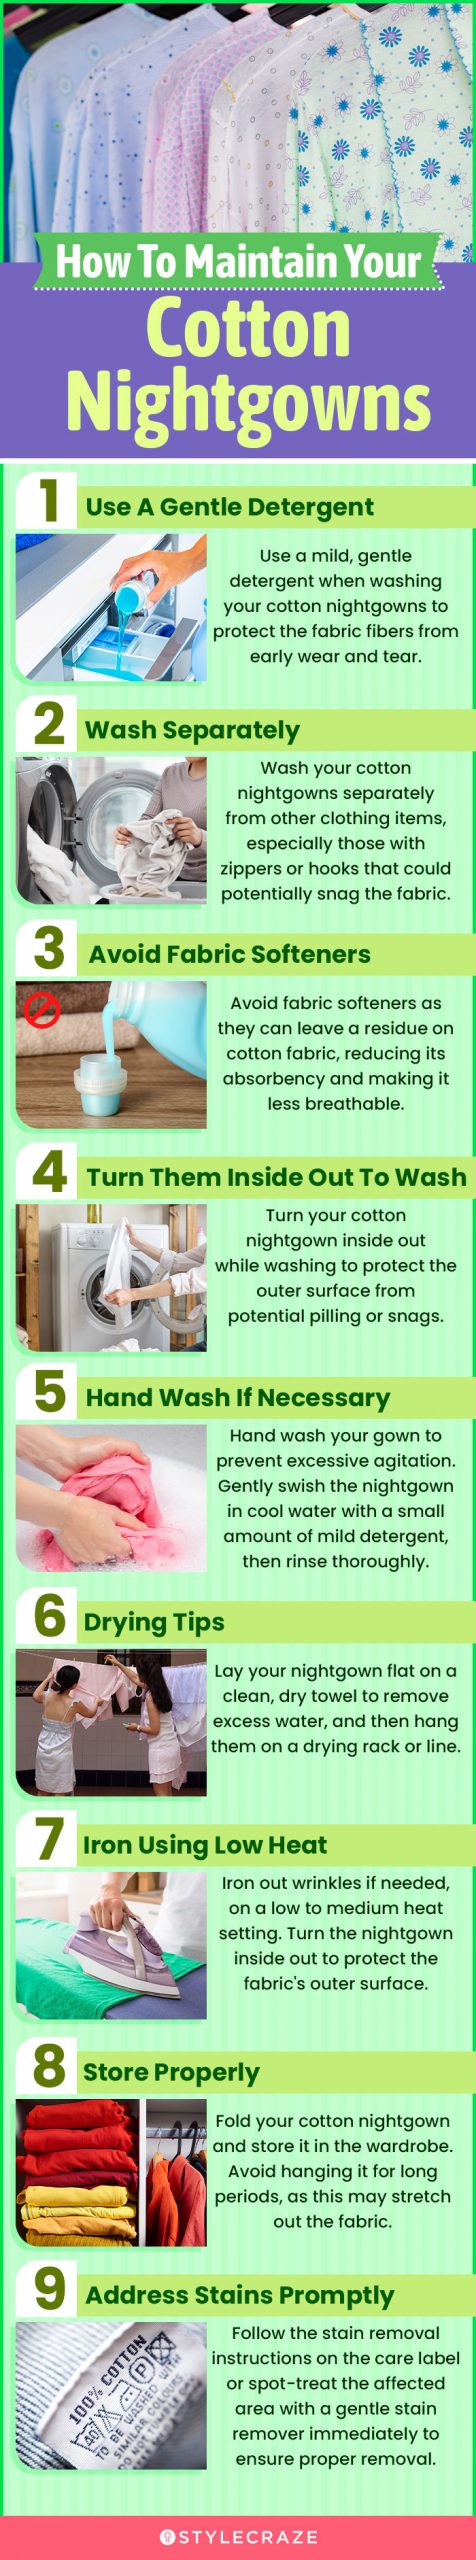 How To Maintain Your Cotton Nightgowns (infographic)